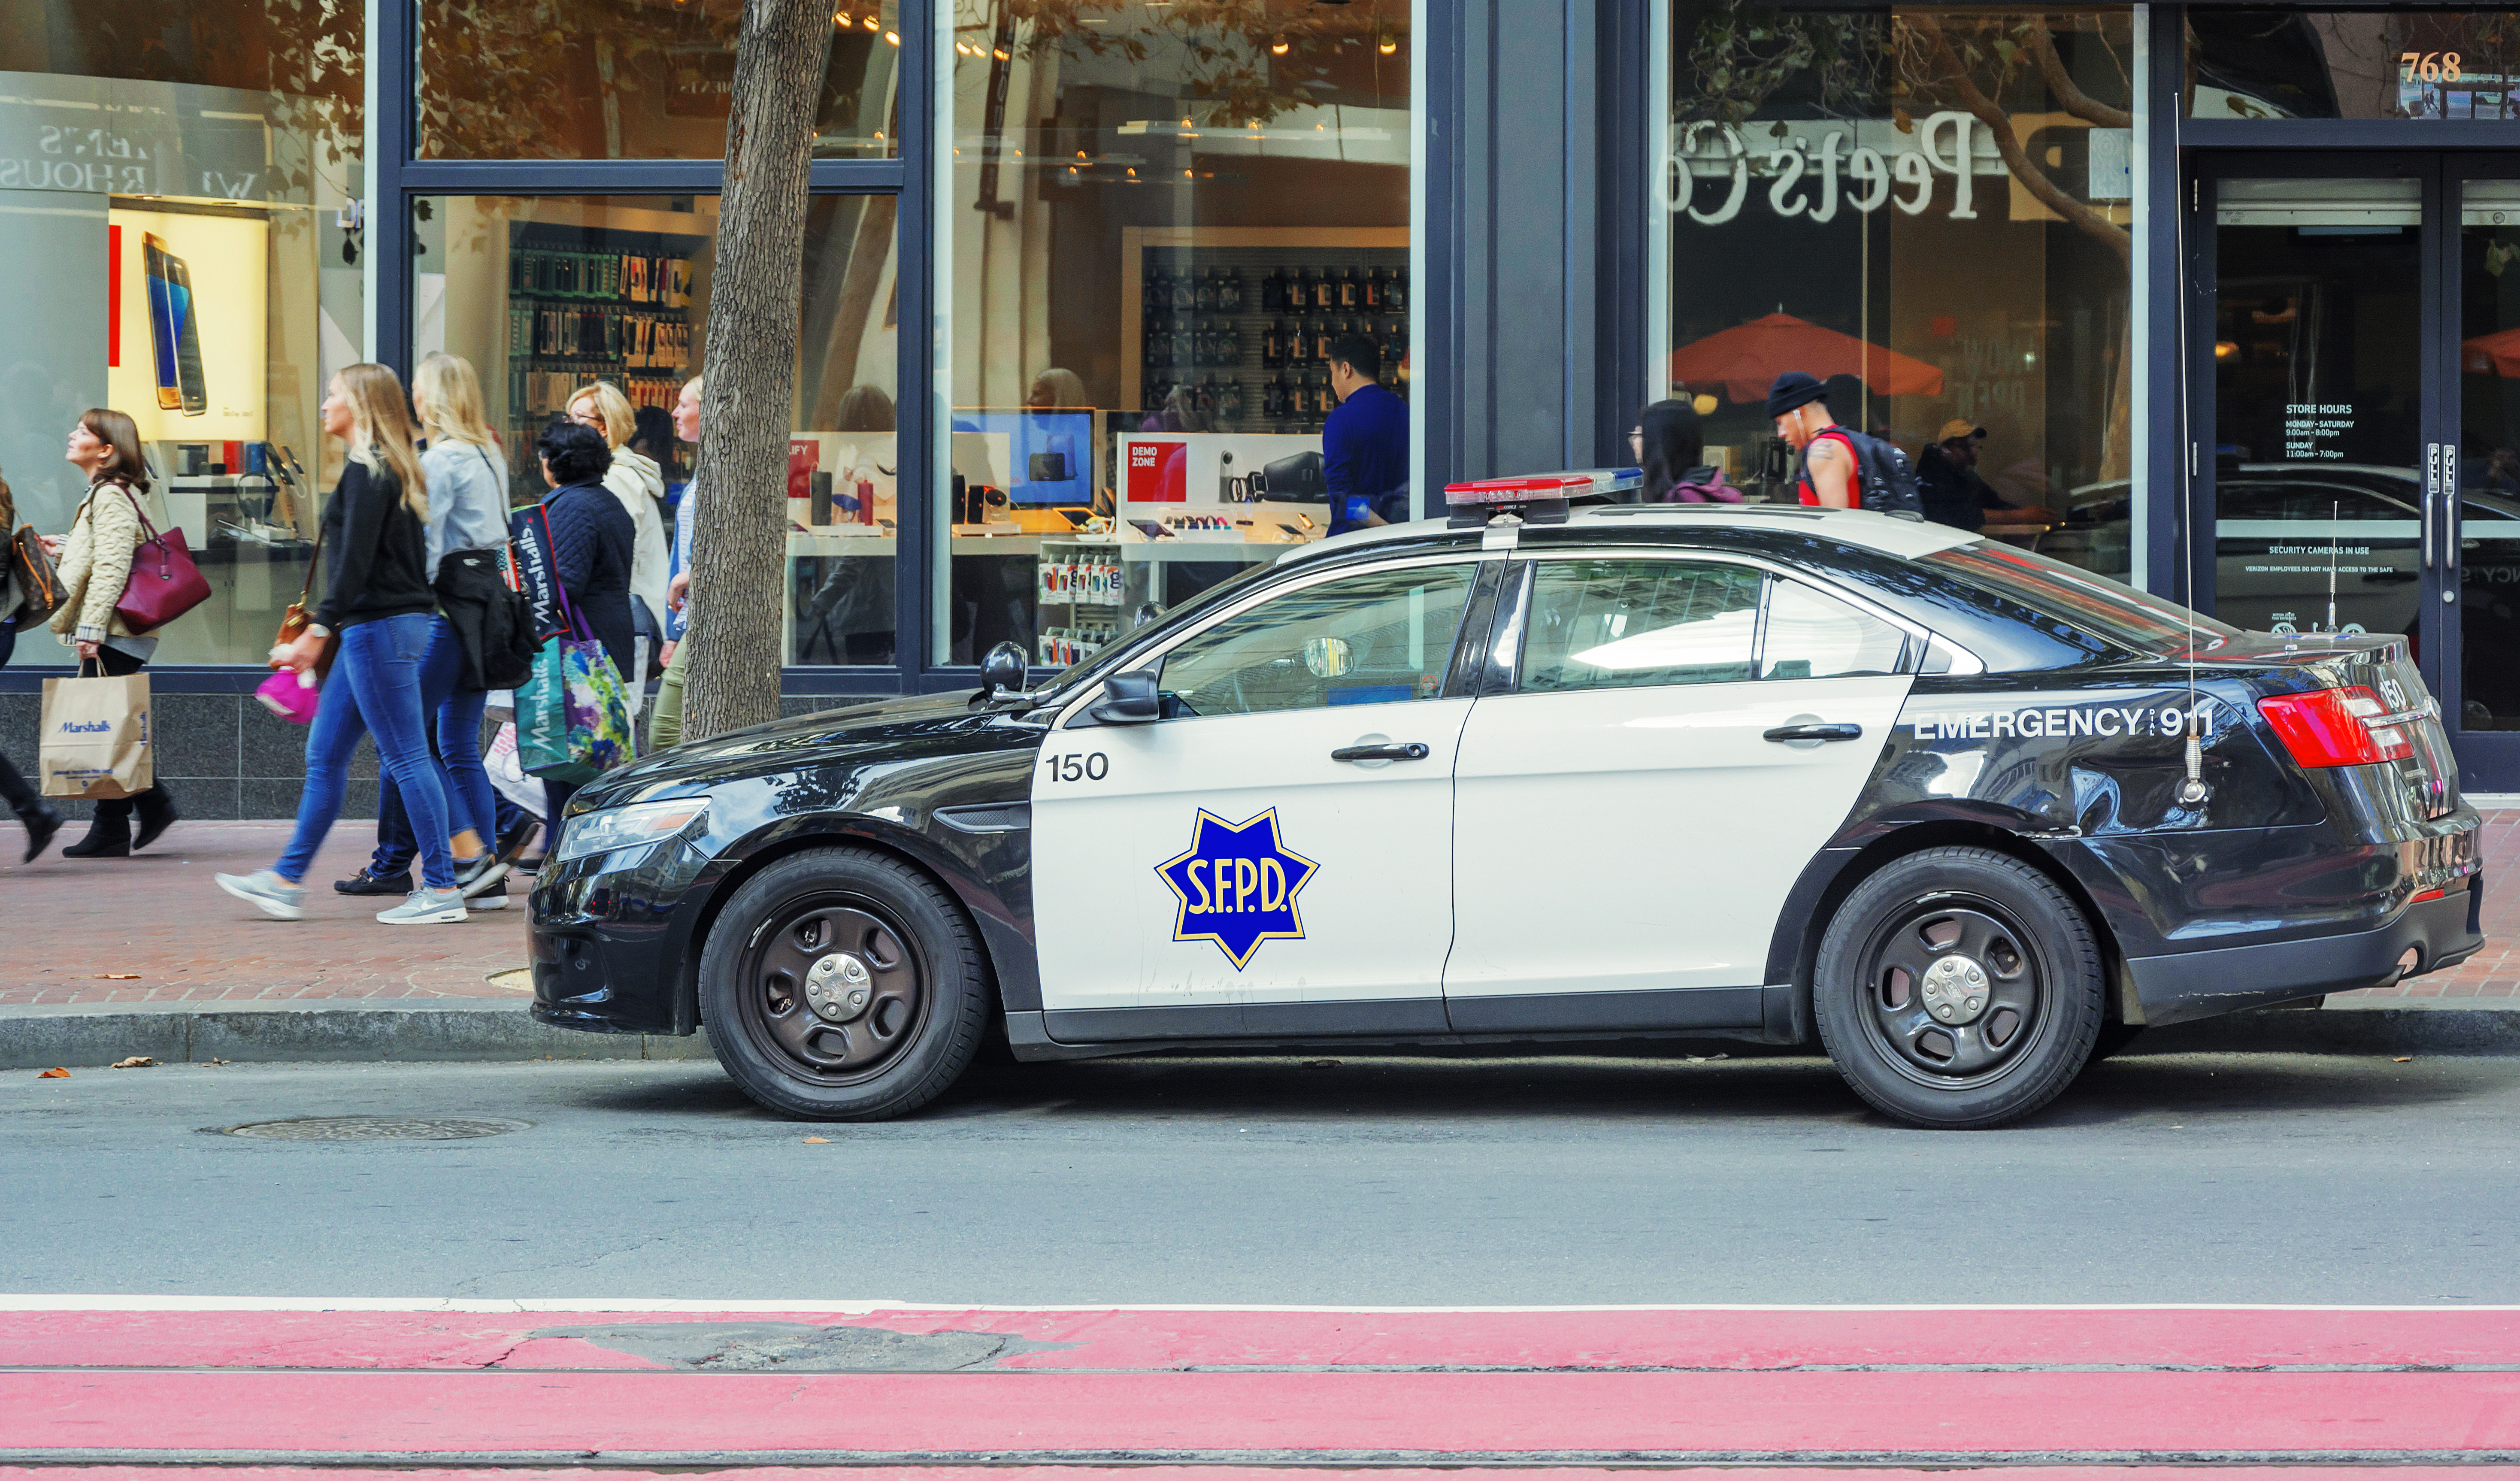 San Francisco approves police petition to use robots as a 'deadly force option'